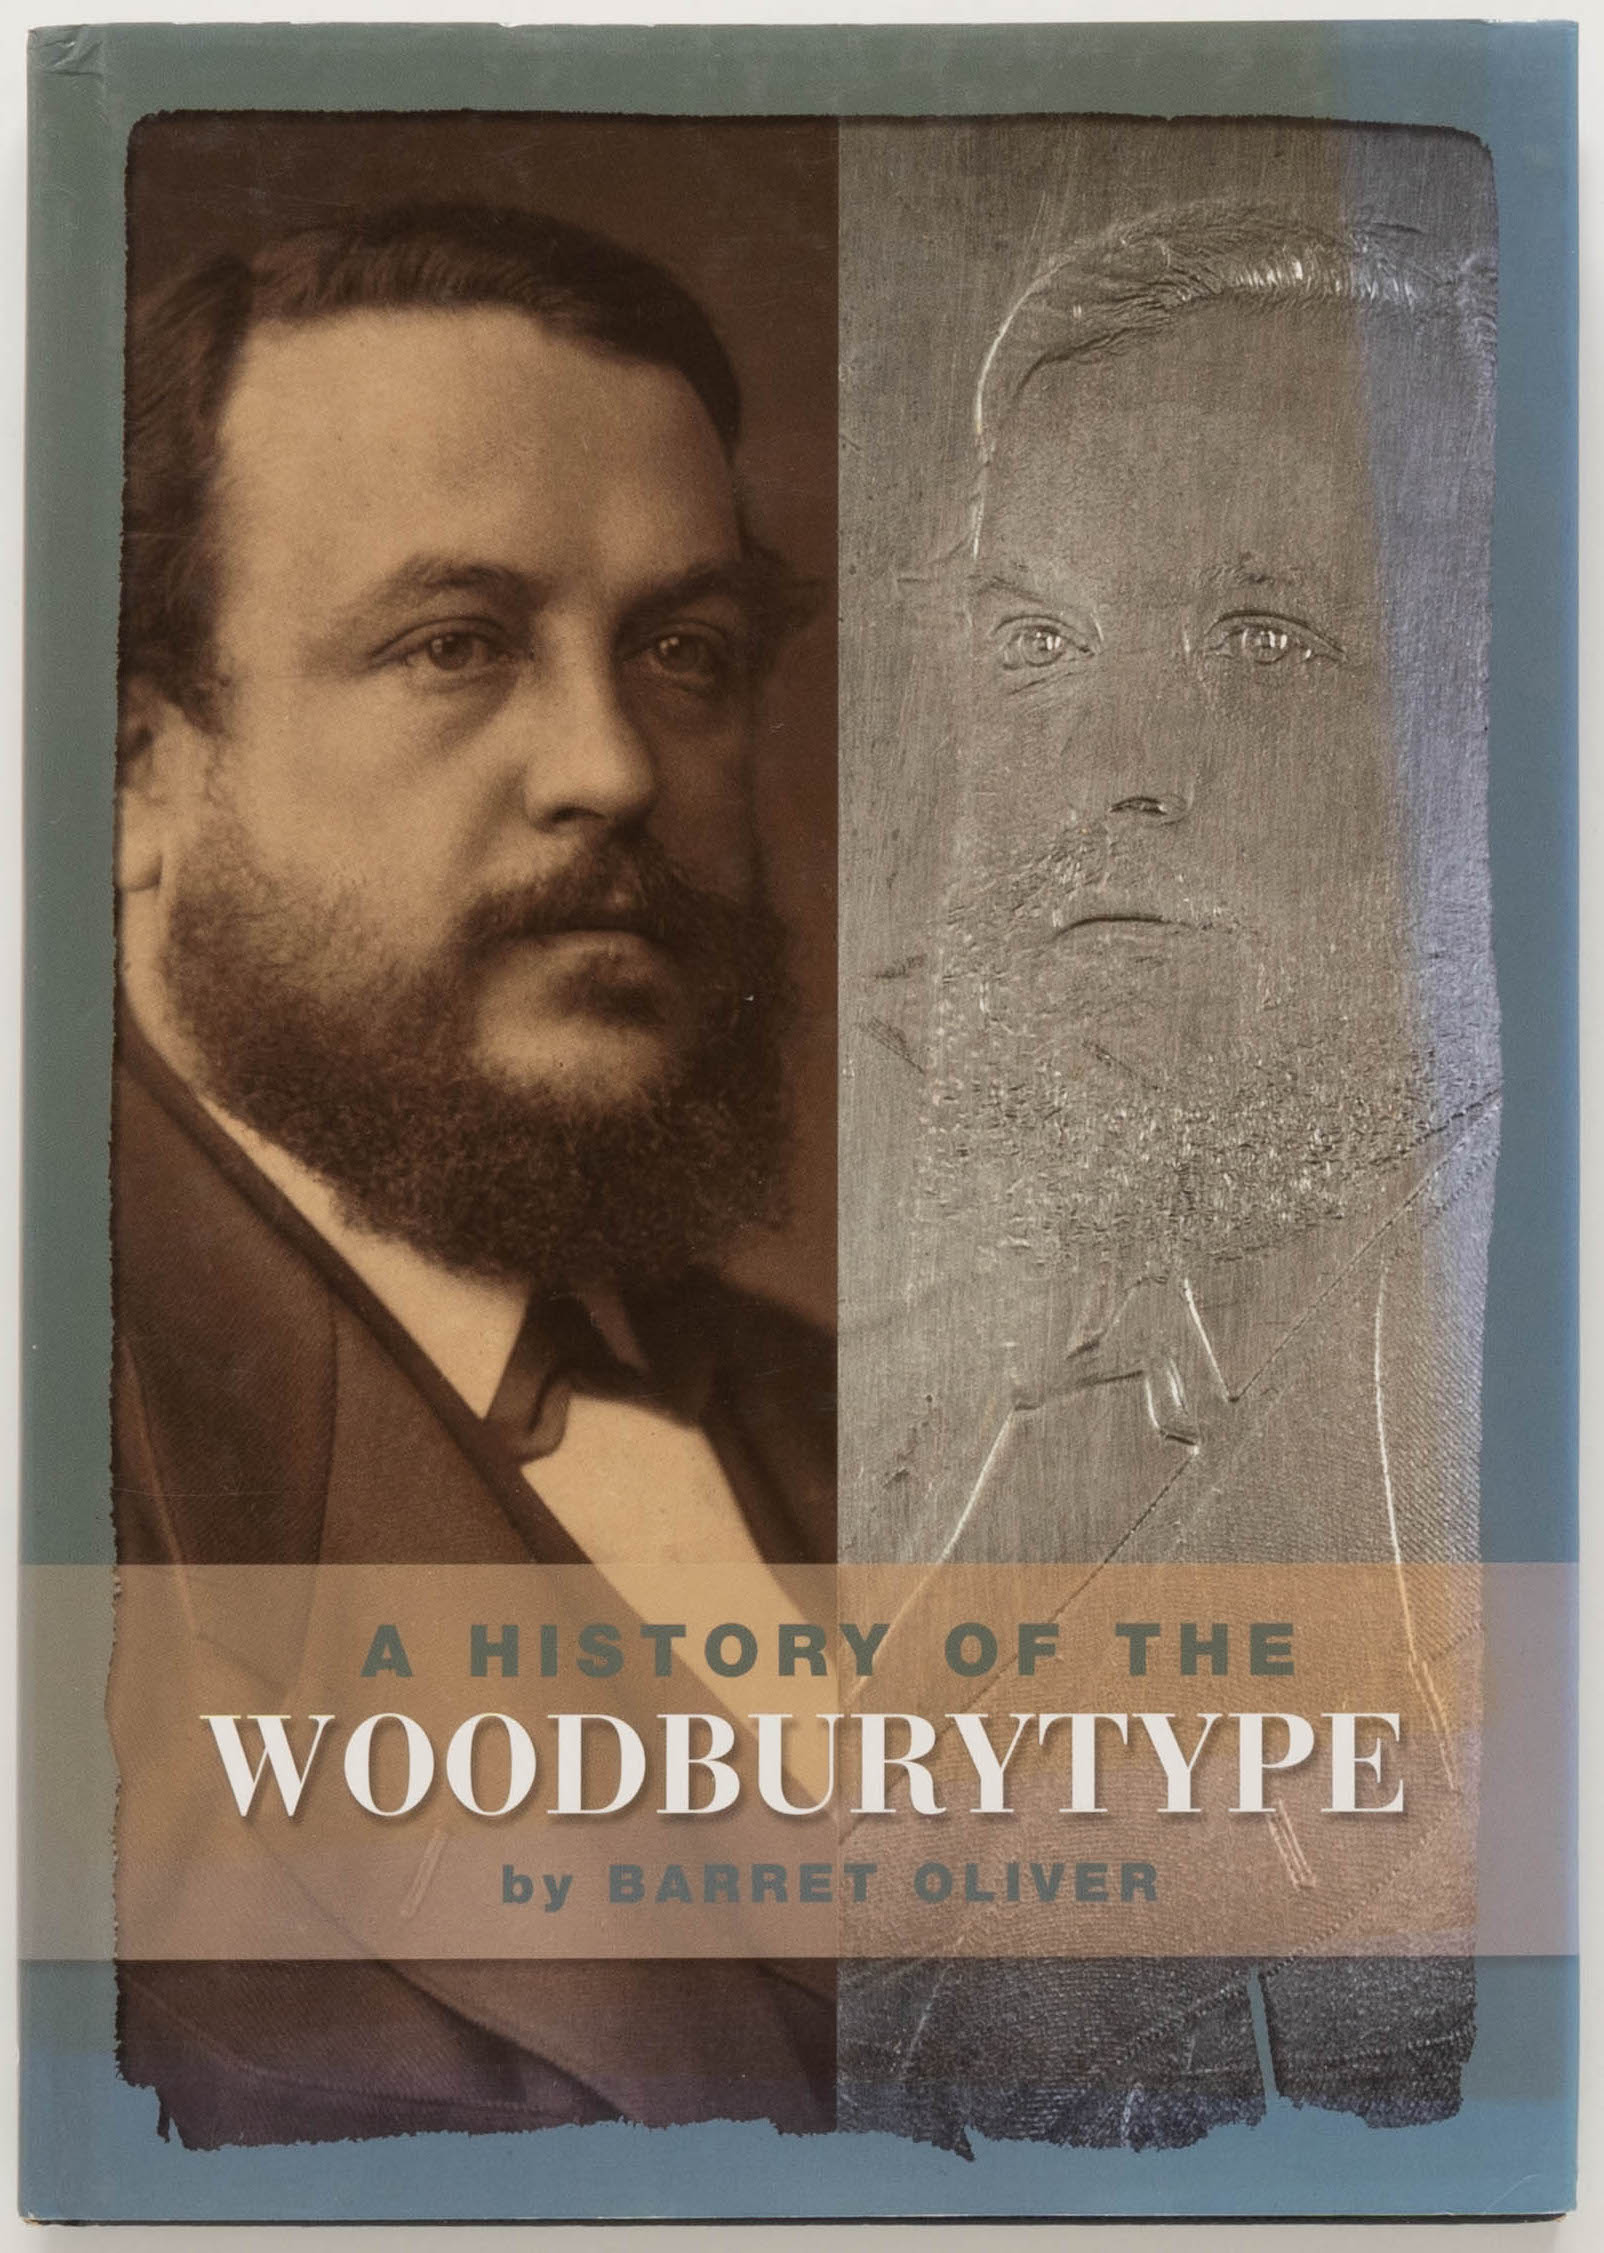 A History of the Woodburytype - Barret Oliver